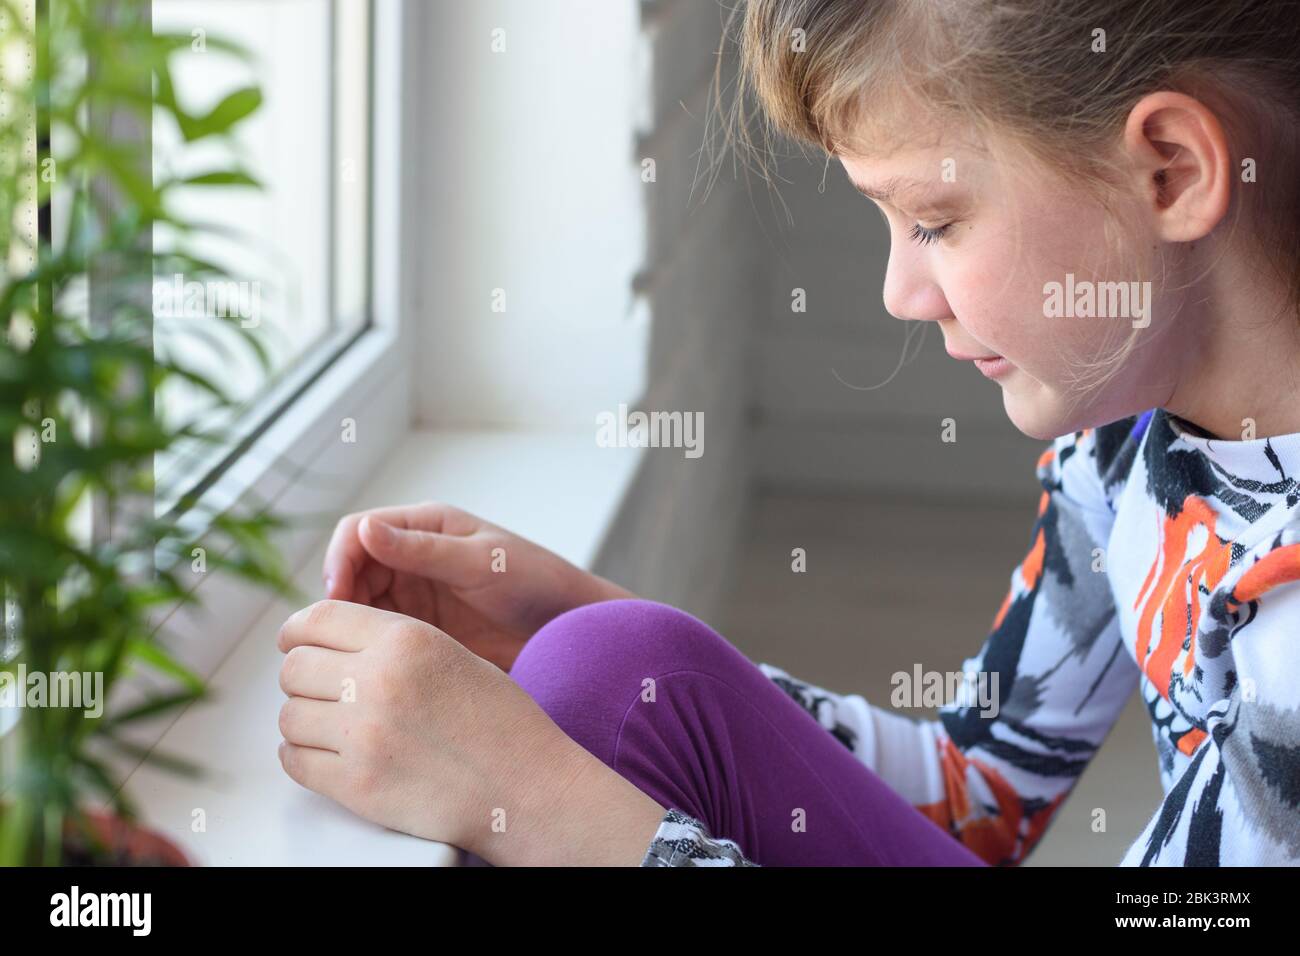 Offended girl cries at the window in the room Stock Photo